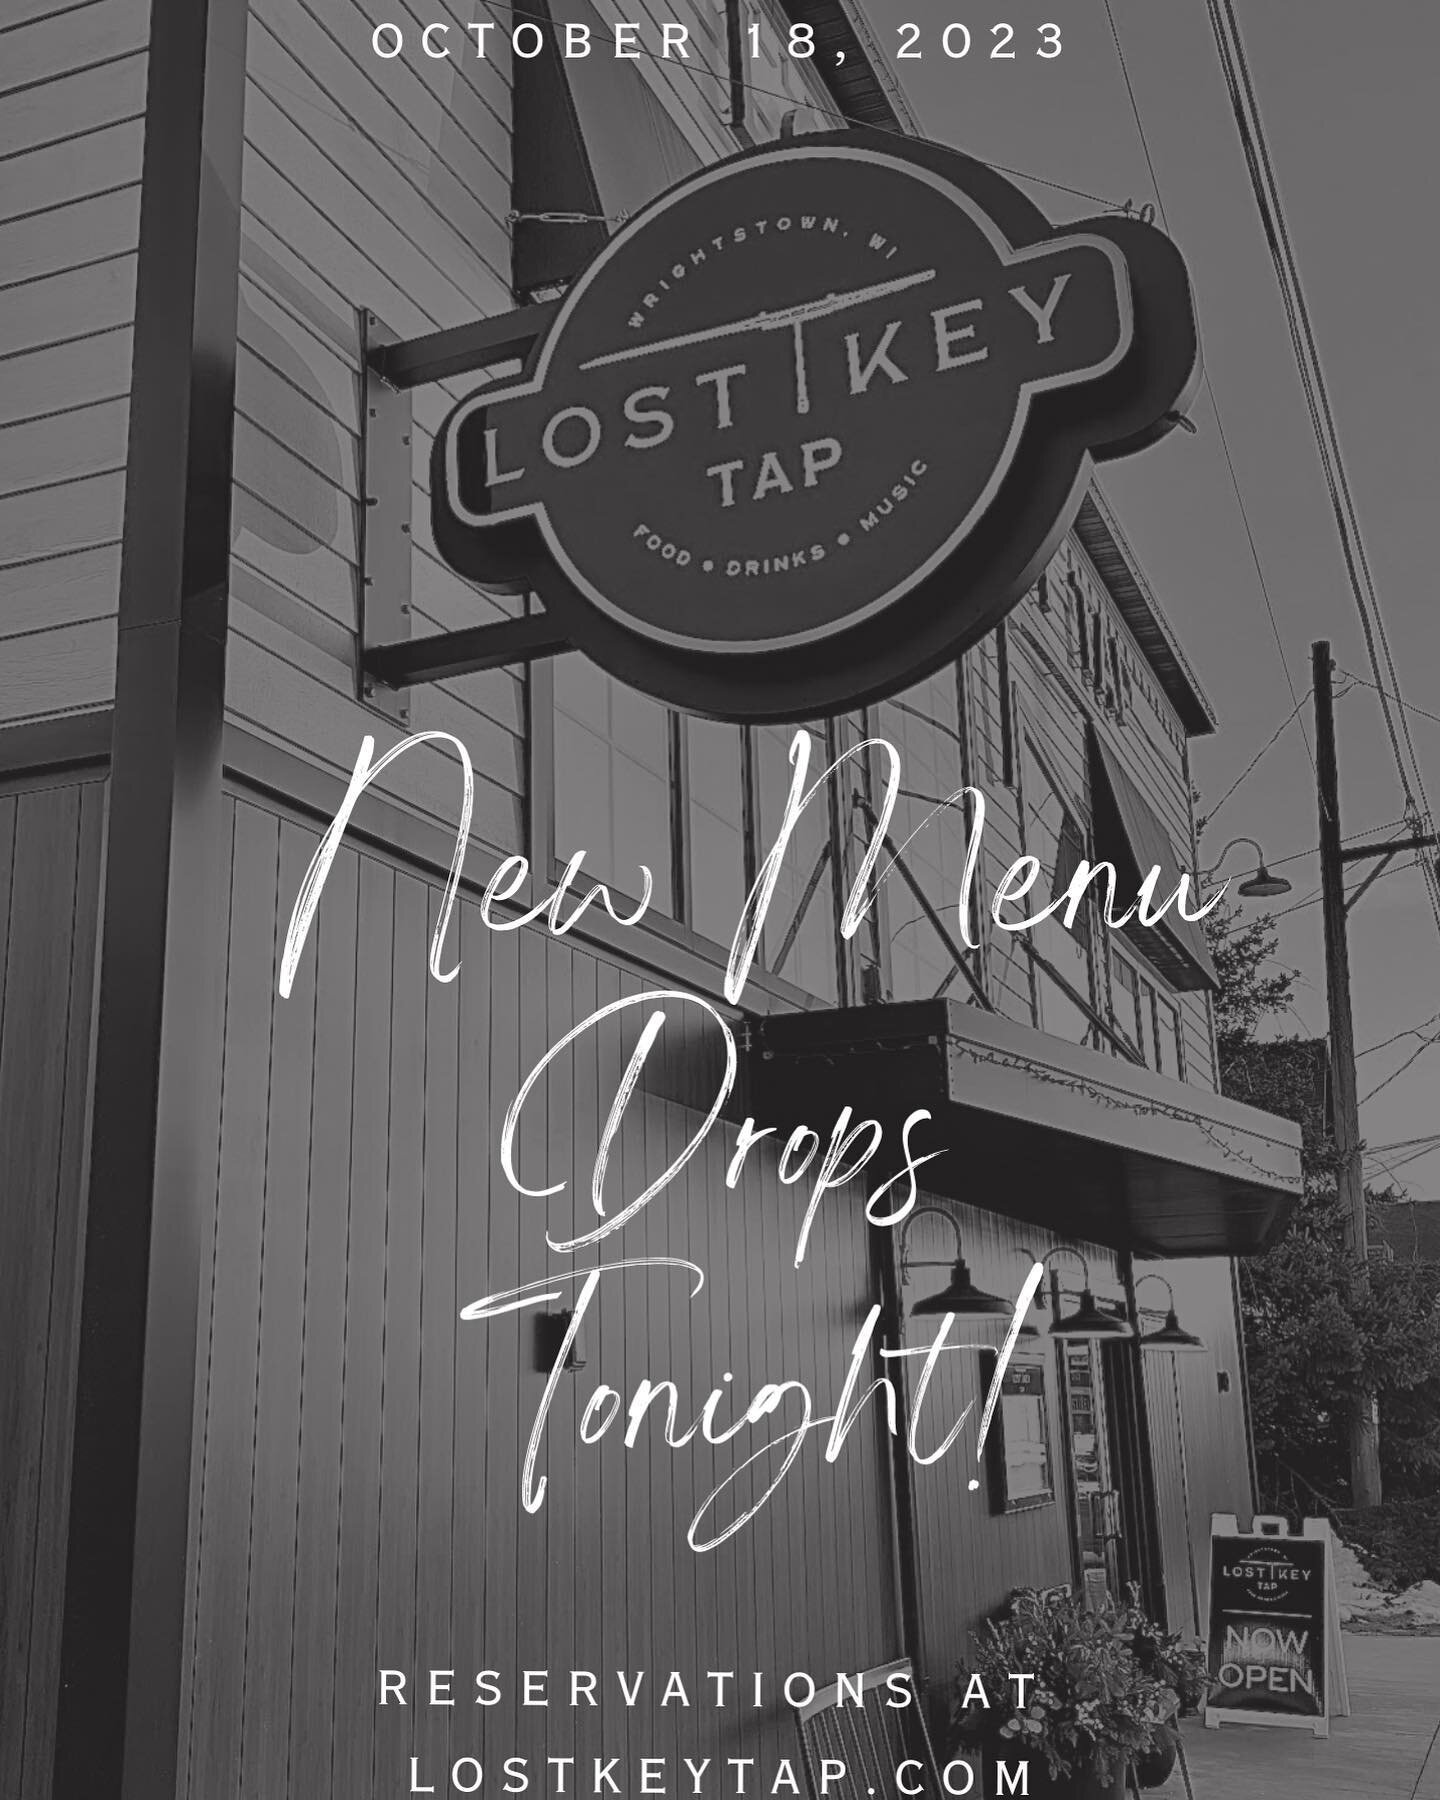 Our fall menu drops tonight!! 
Make your reservations on our website or give us a call! 
.
.
.
#newmenu #fallmenu #fallflavors #fall #lostkeytap #LKT #wrightstown #foxcities #foxvalley #foxcitieseats #depere #greenbay #greenbayfoodie #appleton #bar #